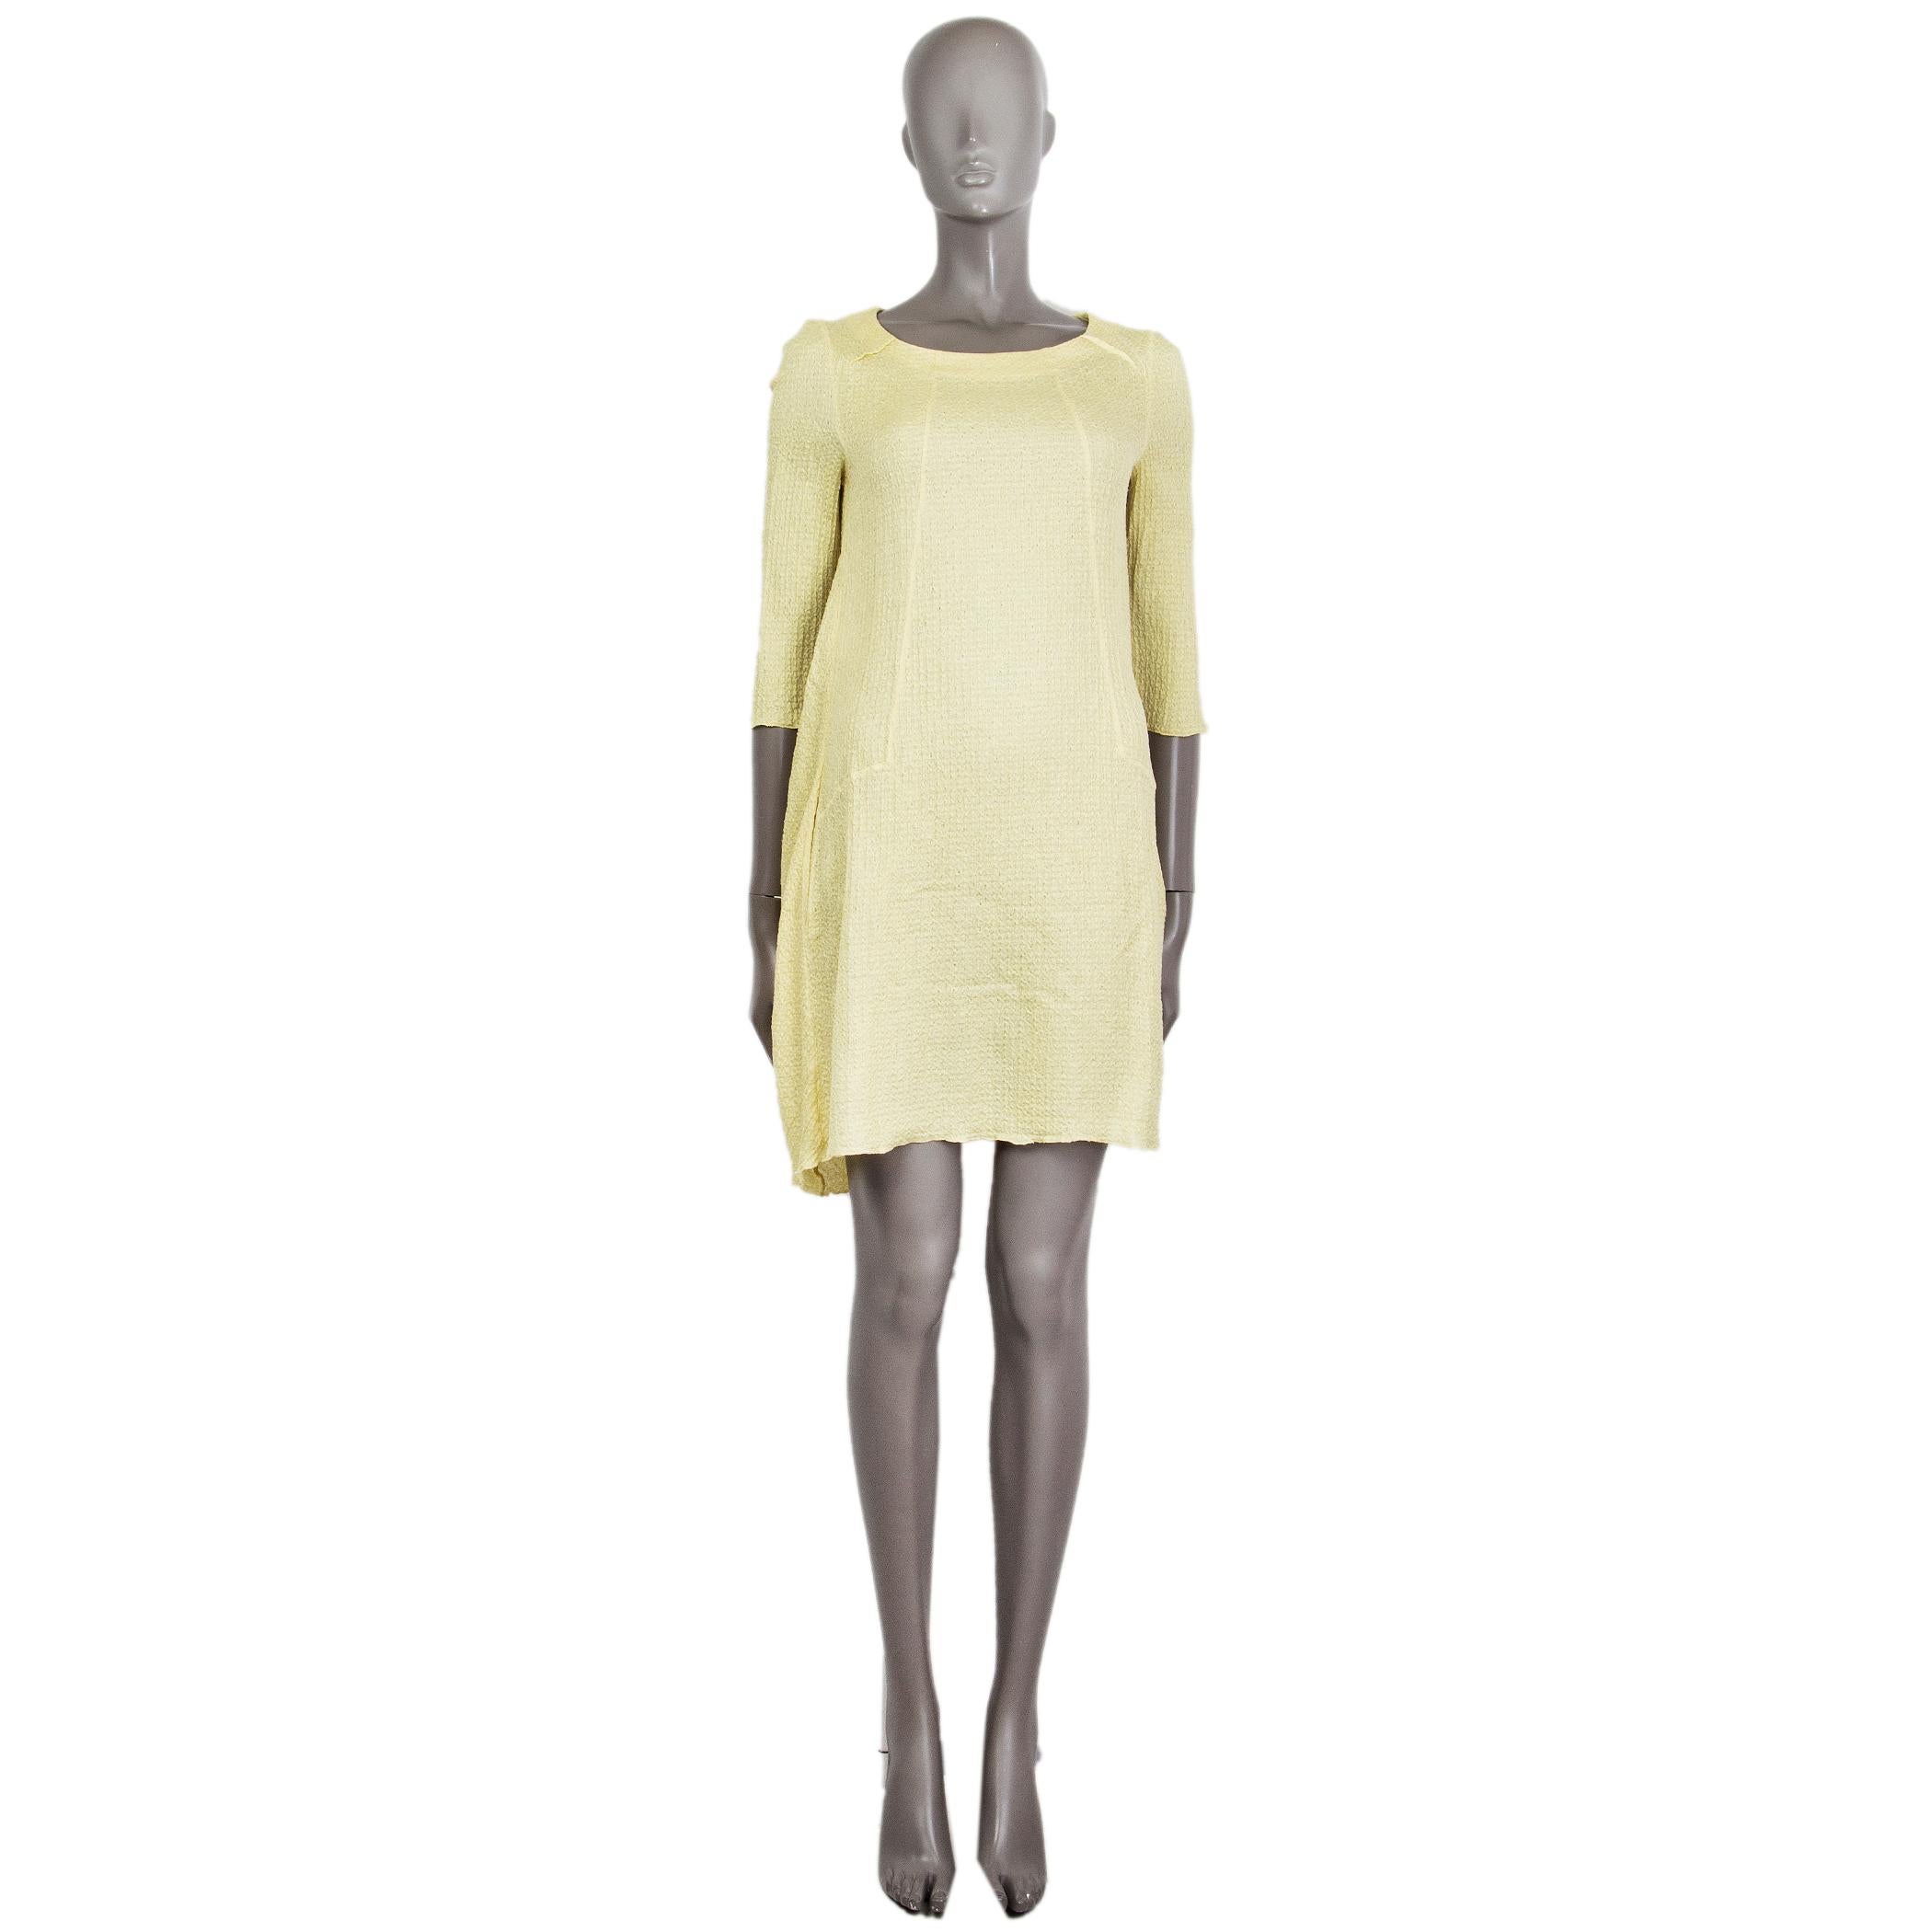 100% authentic Marni textured shift dress in lemon yellow silk (58%) and linen (42%). With 3/4 sleeves, draped puckering and pleating on the back, and two slit pockets on the side. Unlined. Has been worn and is in excellent condition.